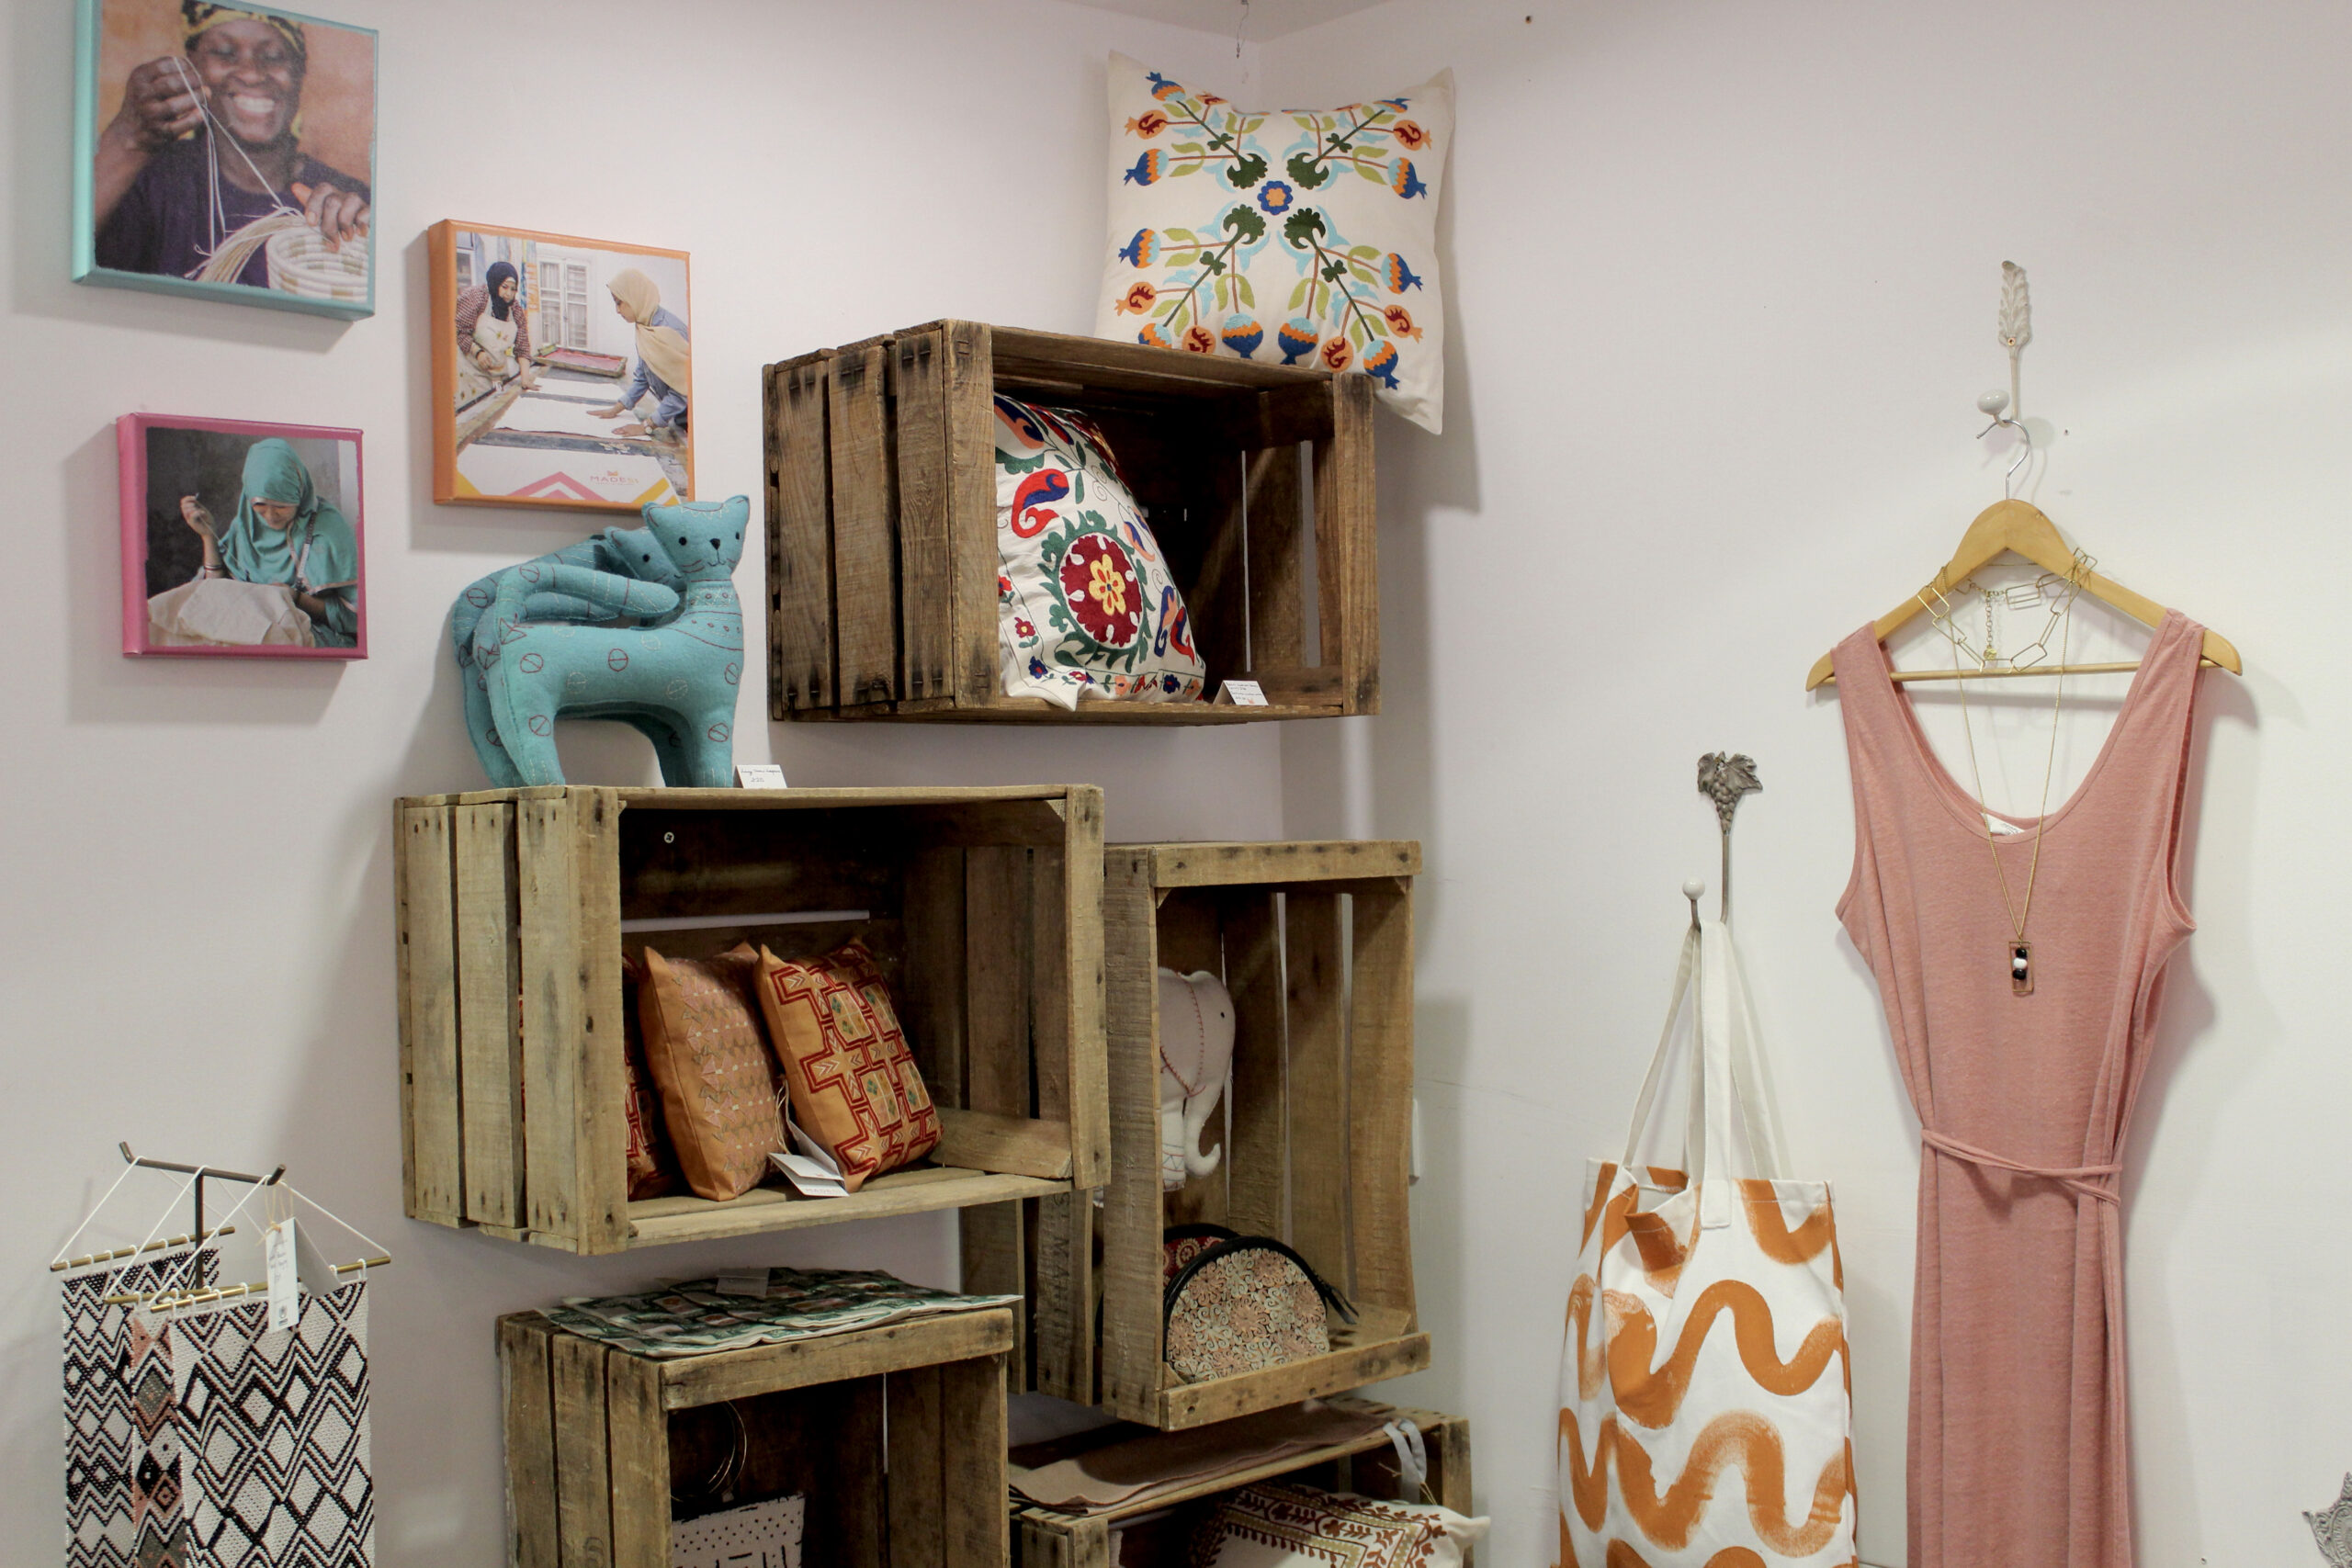 Clothes and Pillows on display in wooden crates at The Fair Shop located in Dukes Lane in Brighton.